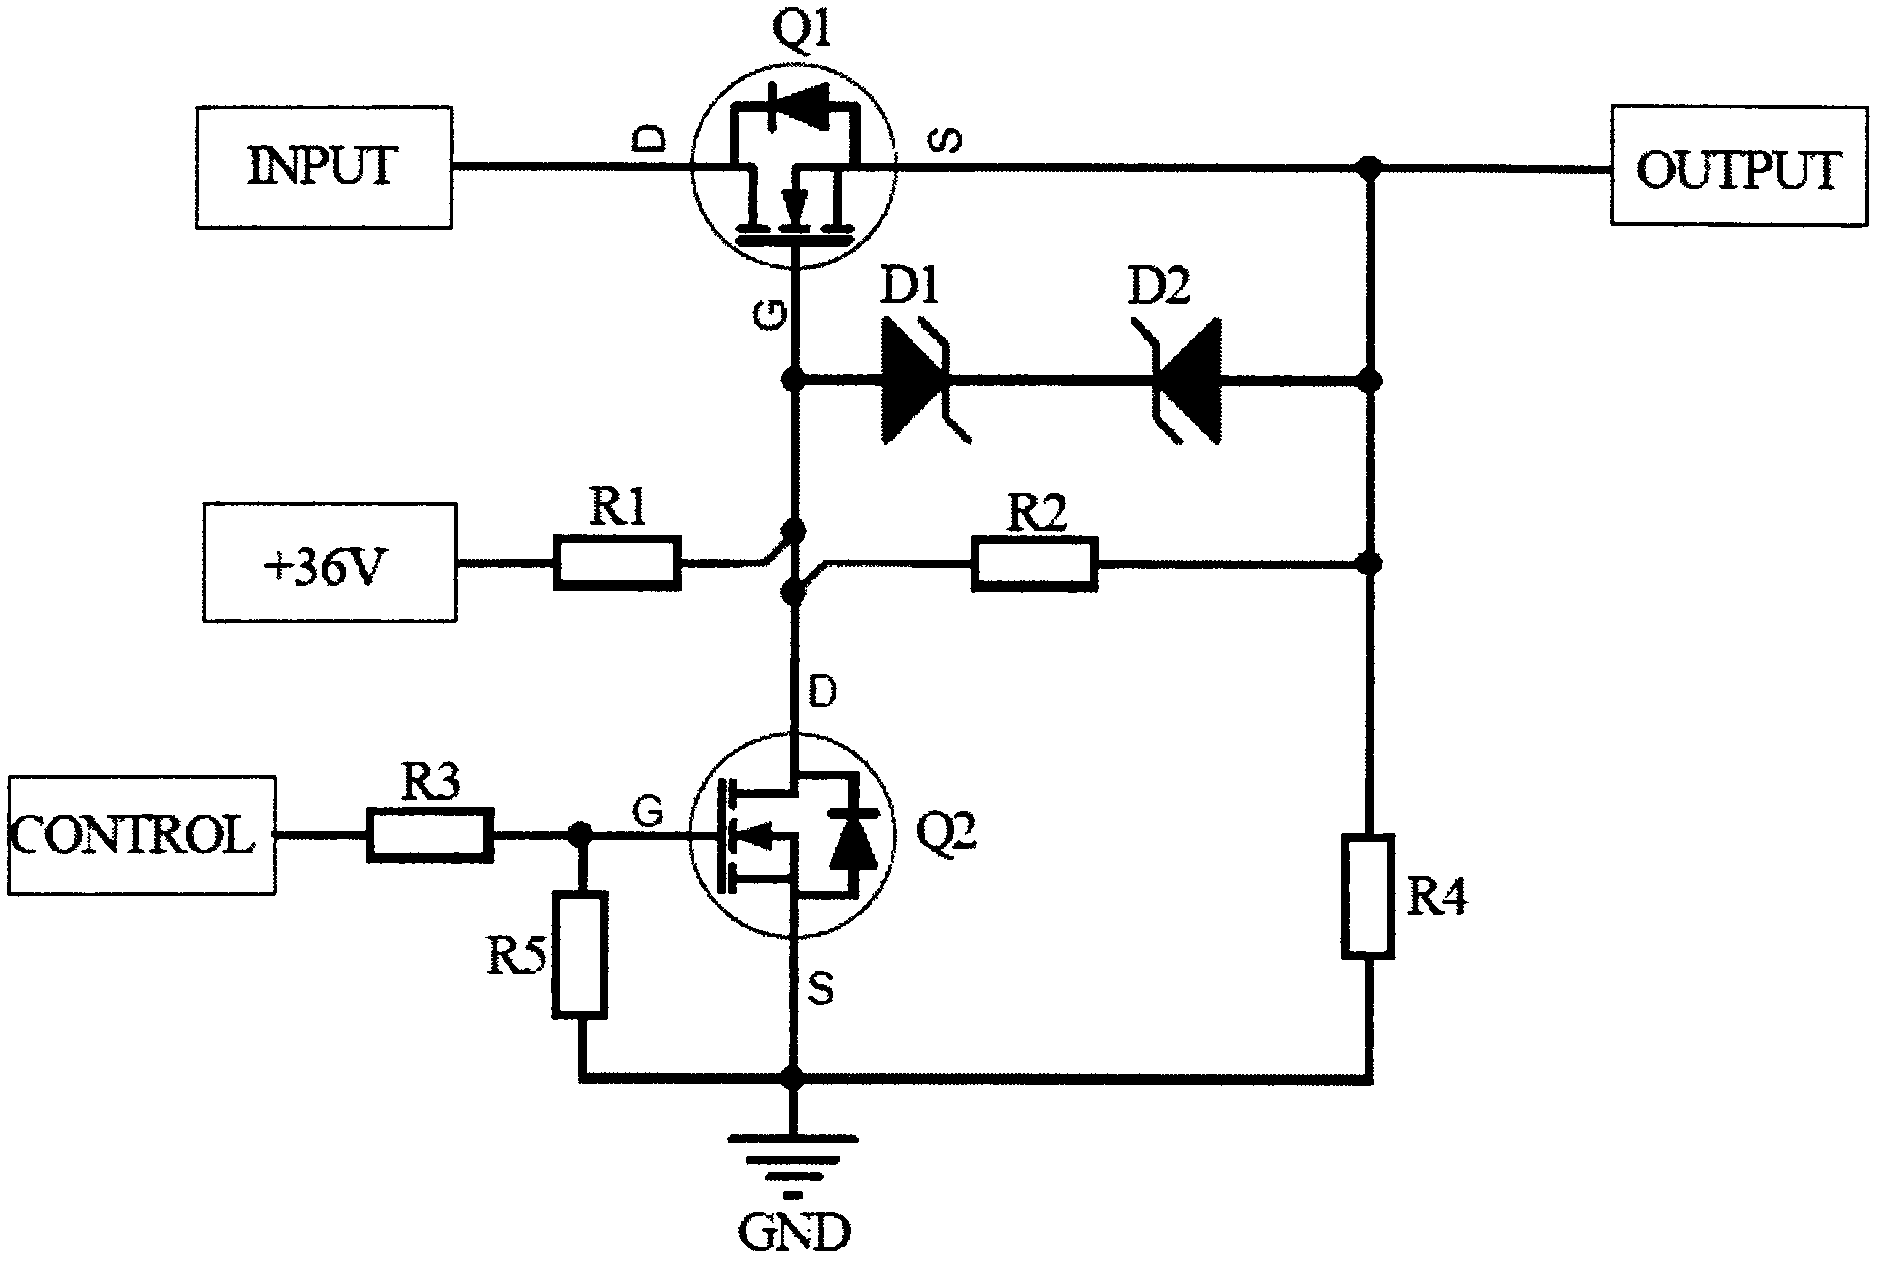 Power switching tube driving circuit applied to electronic safety device